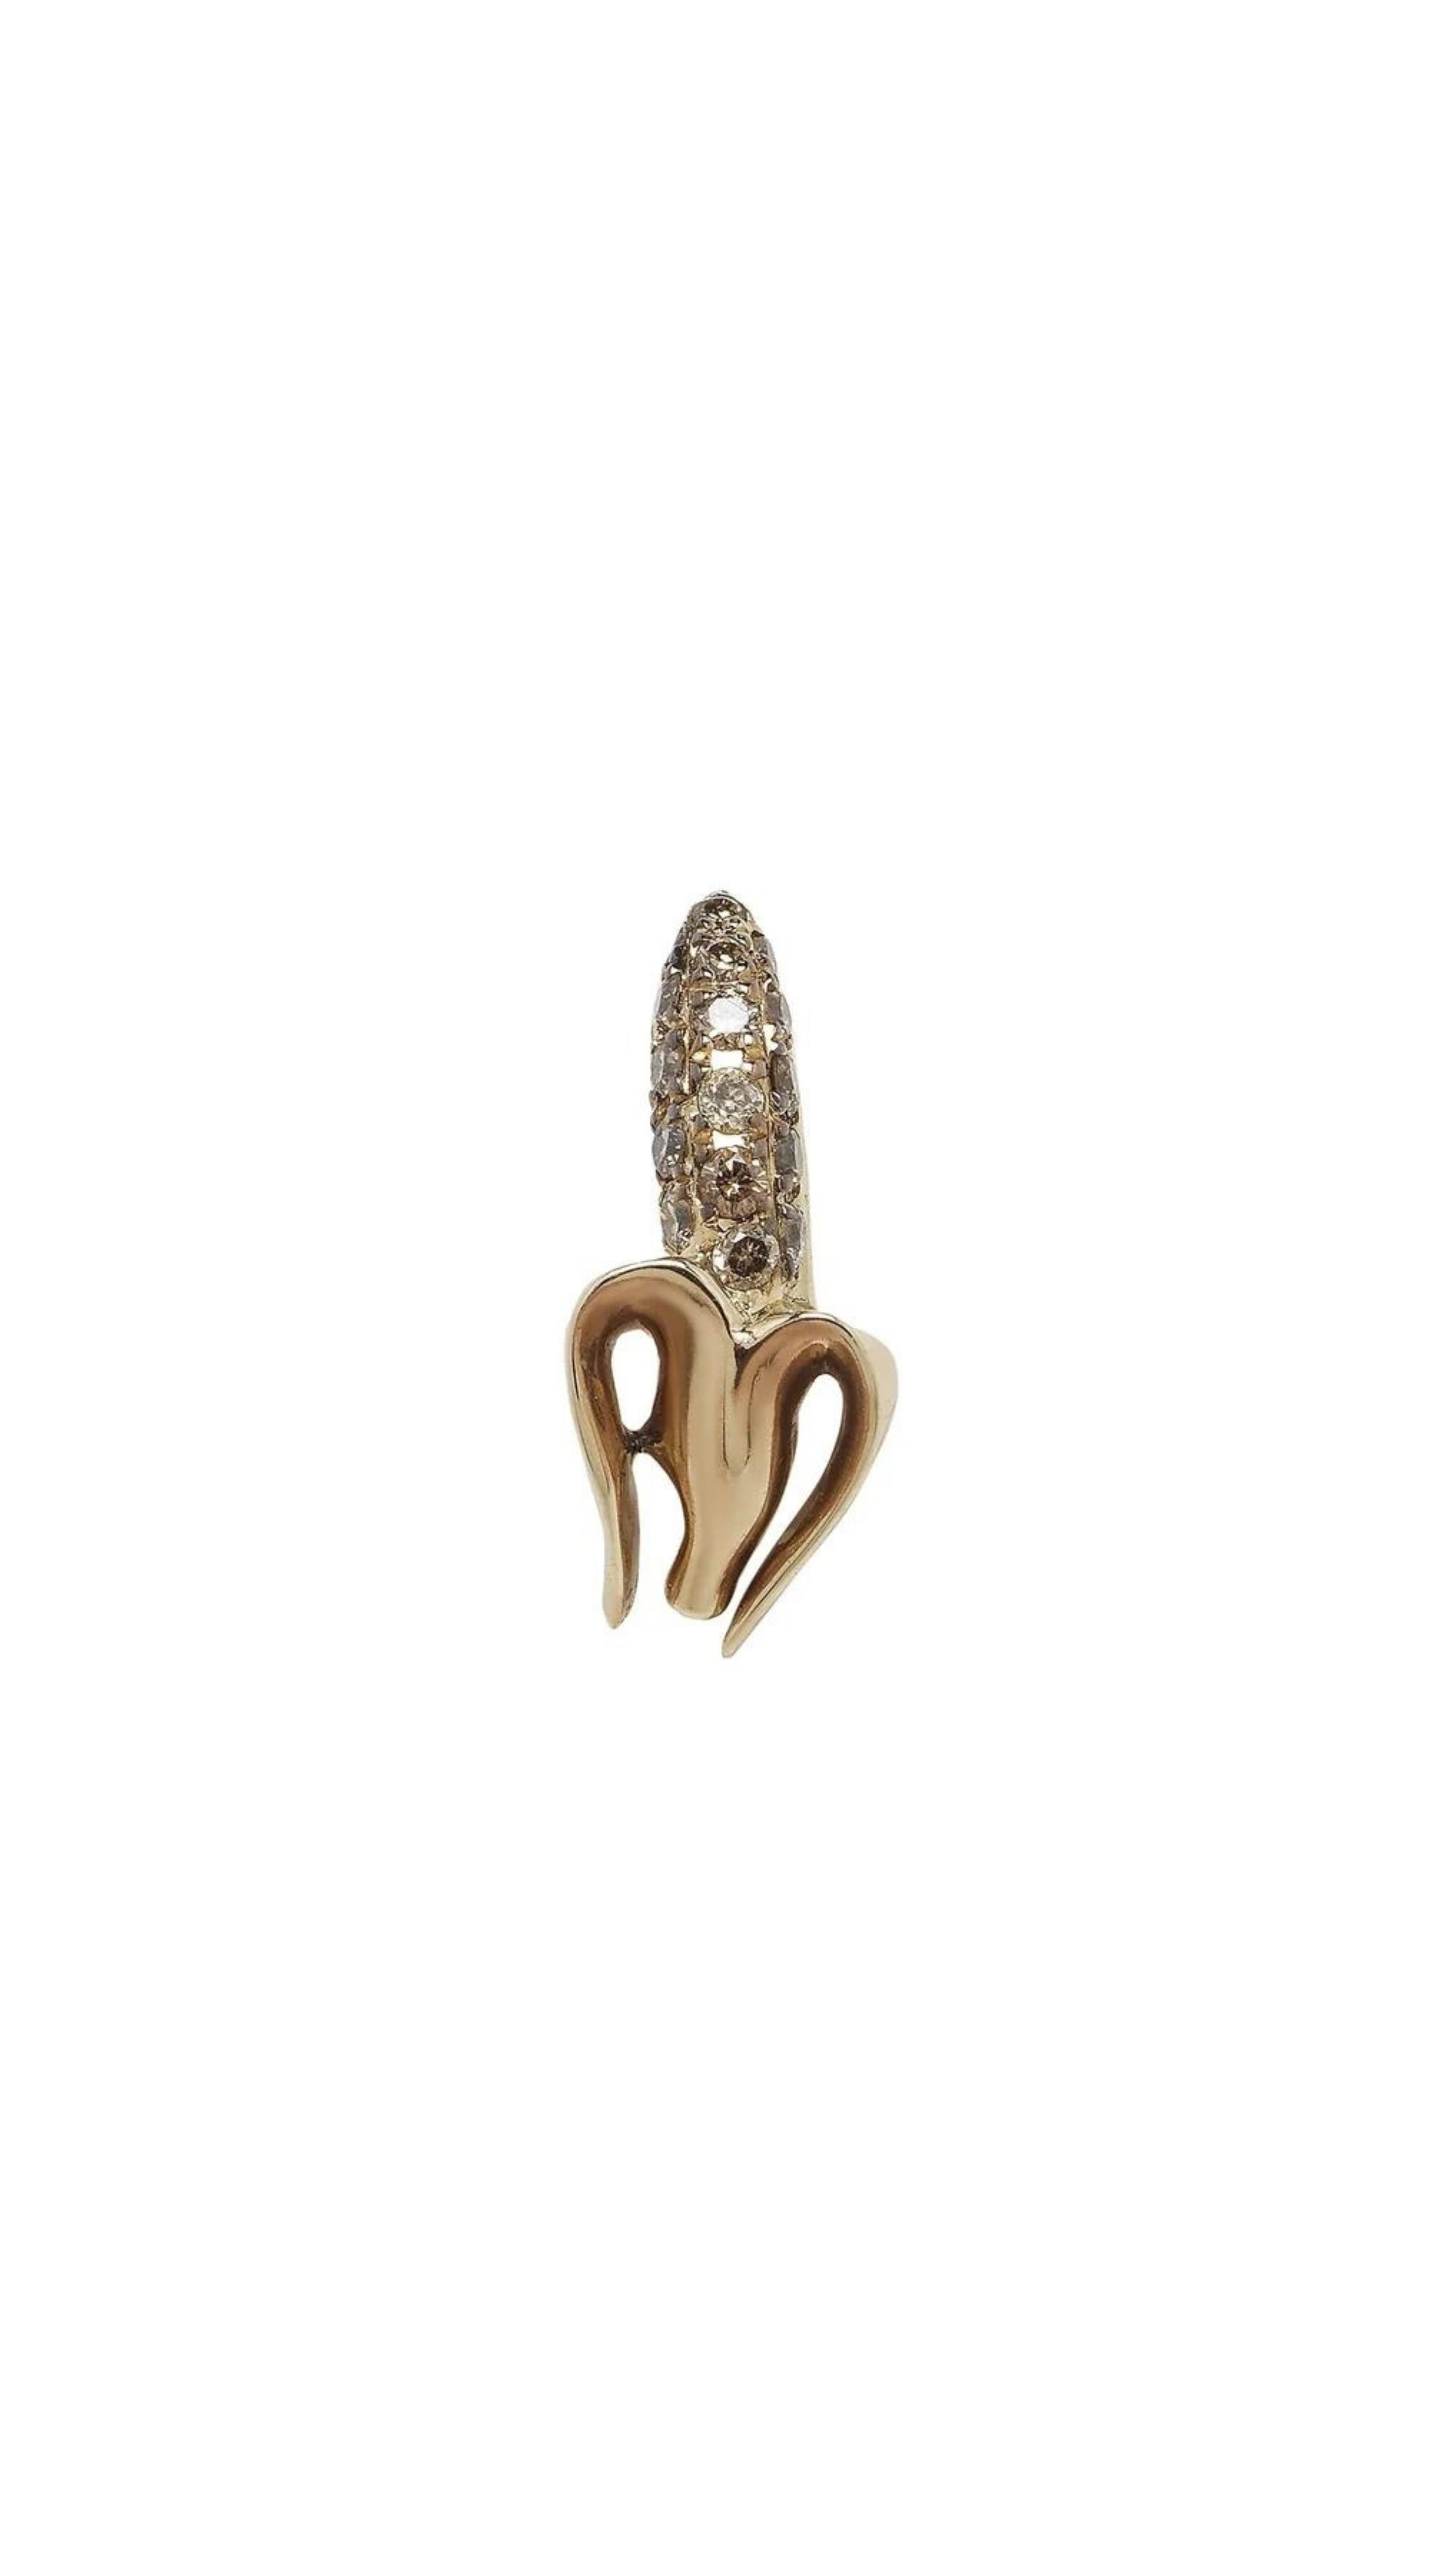 Bibi van der Velden Monkey Mini Banana Stud in Diamond. Single stud earring crafted in the shape of a partially peeled banana. The peel is made from 18K gold and the banana is pave with diamonds. Stud. Photo shows earring from the front angle.